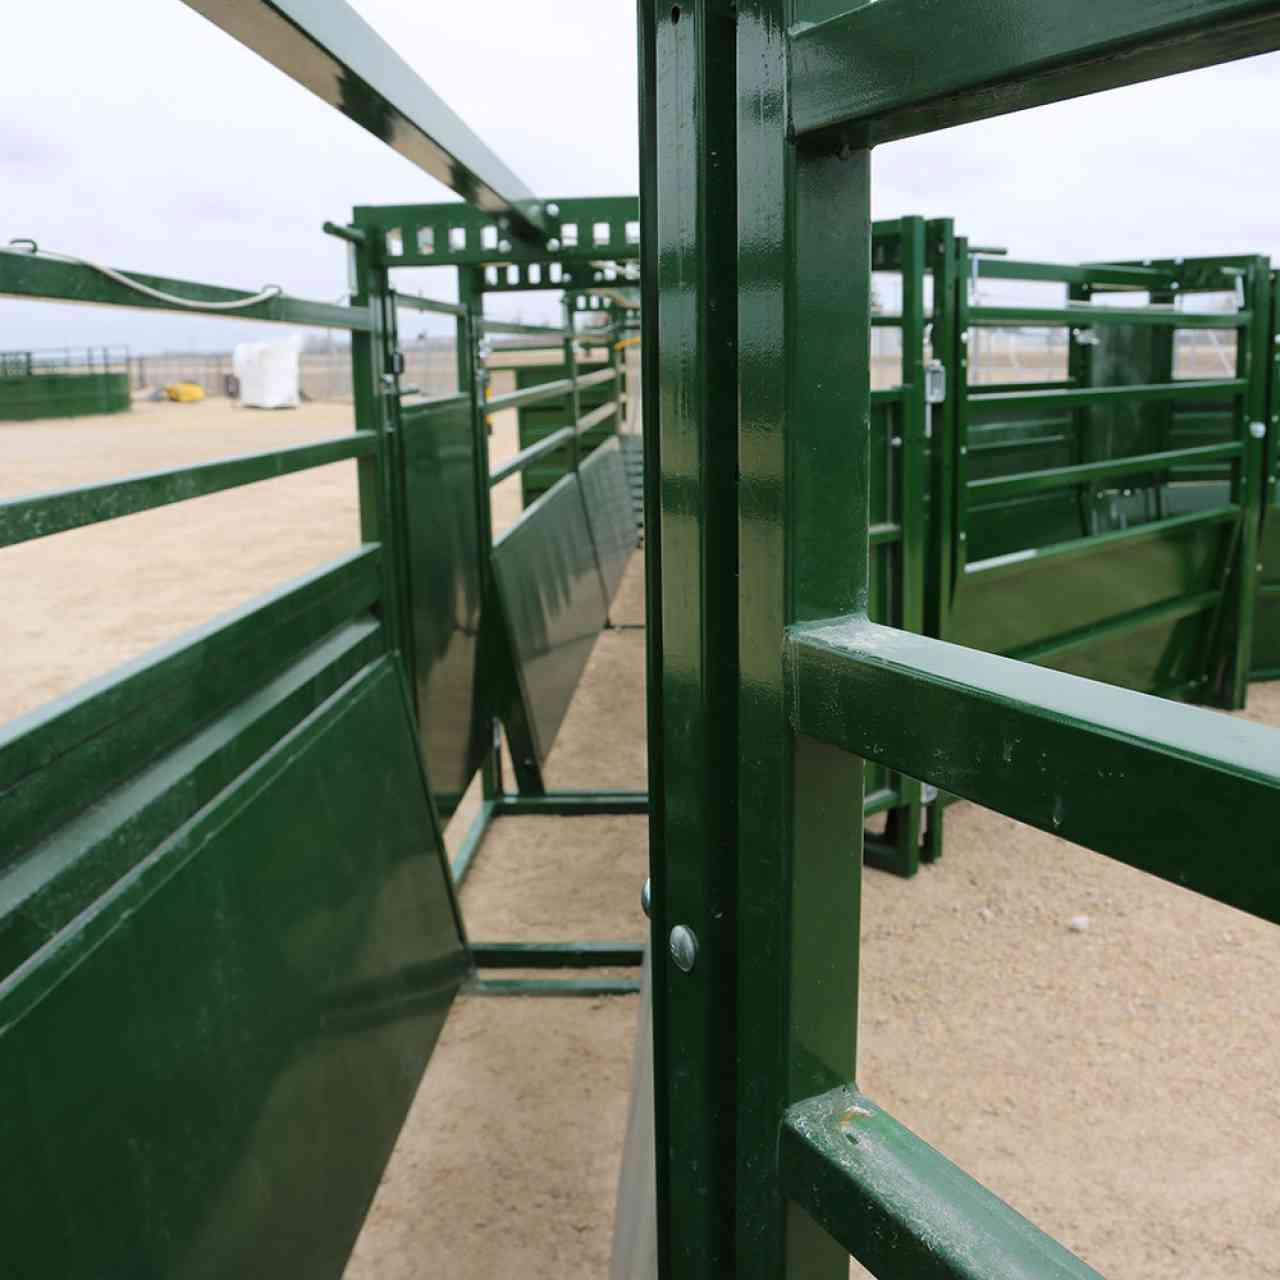 Inside view of adjustable cattle alley